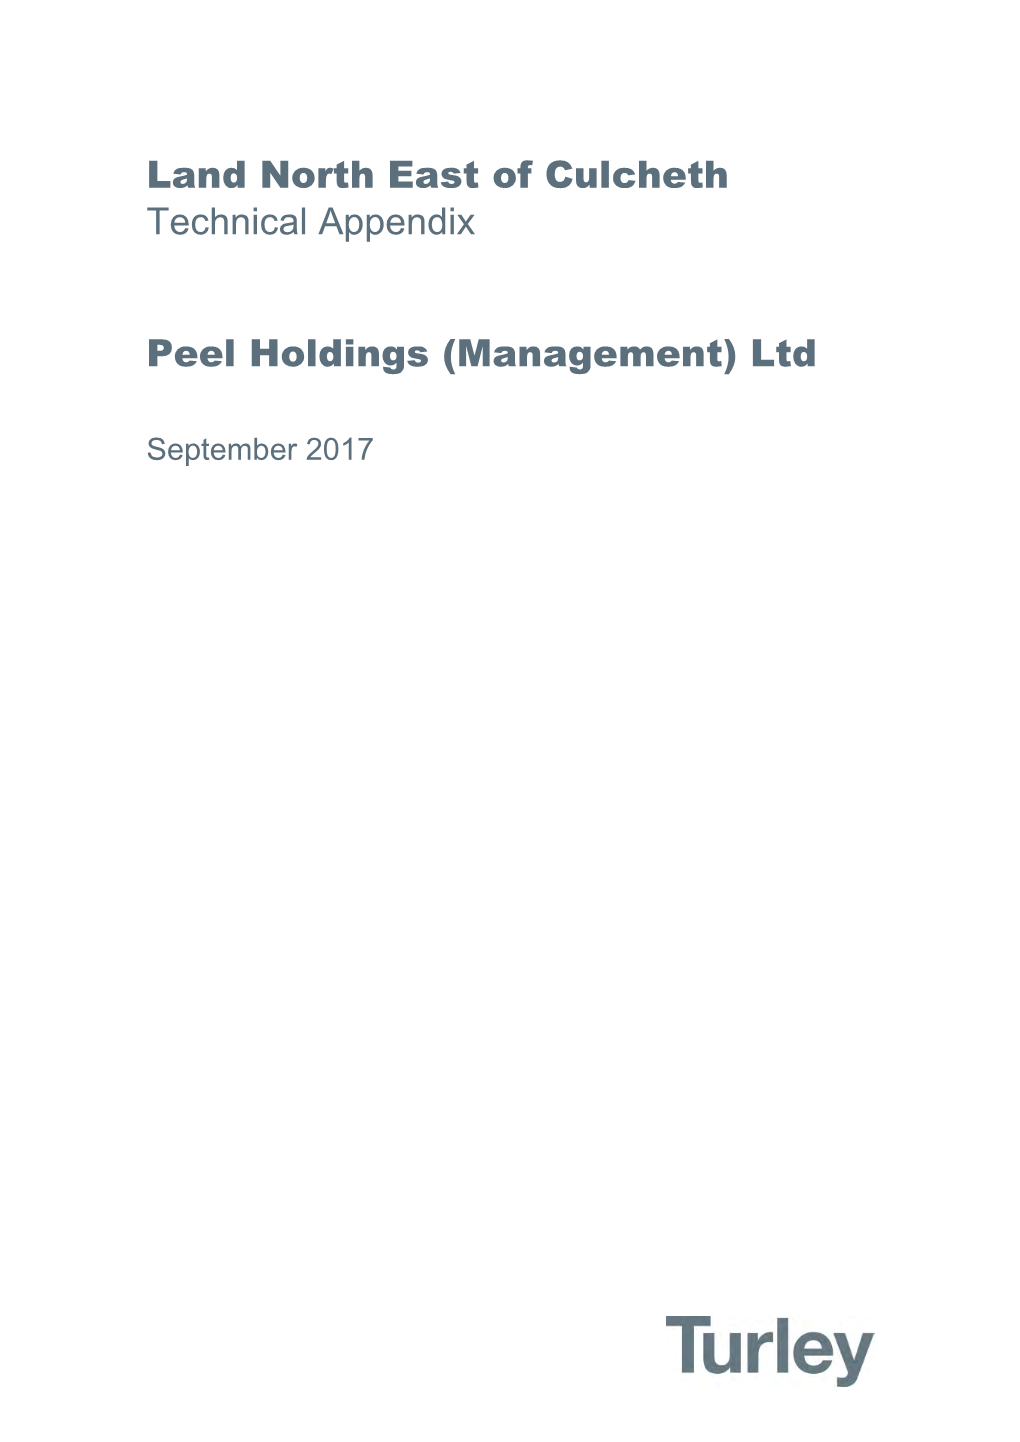 Land North East of Culcheth Technical Appendix Peel Holdings